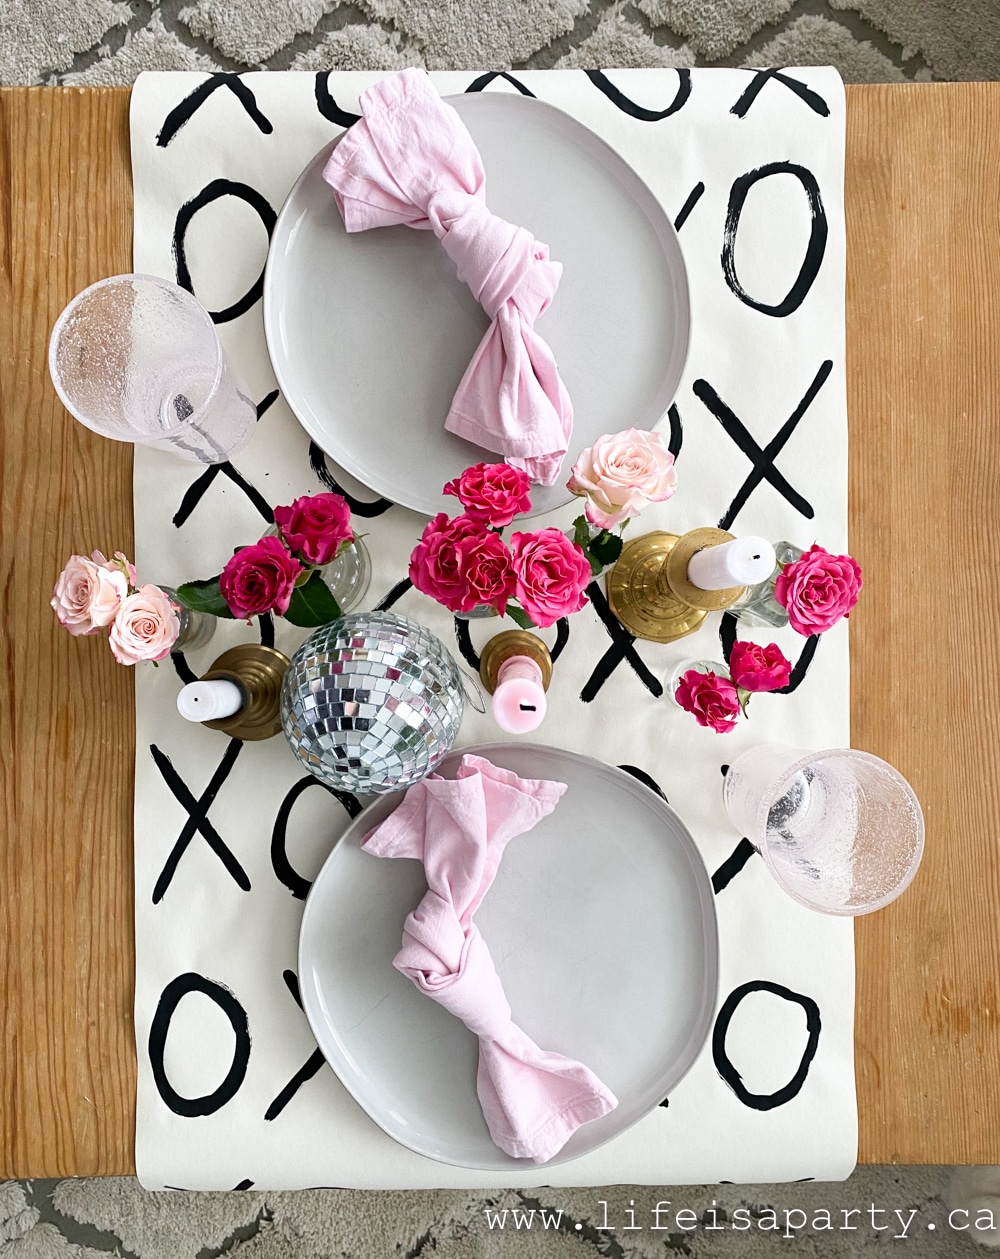 DIY X and O's table runner